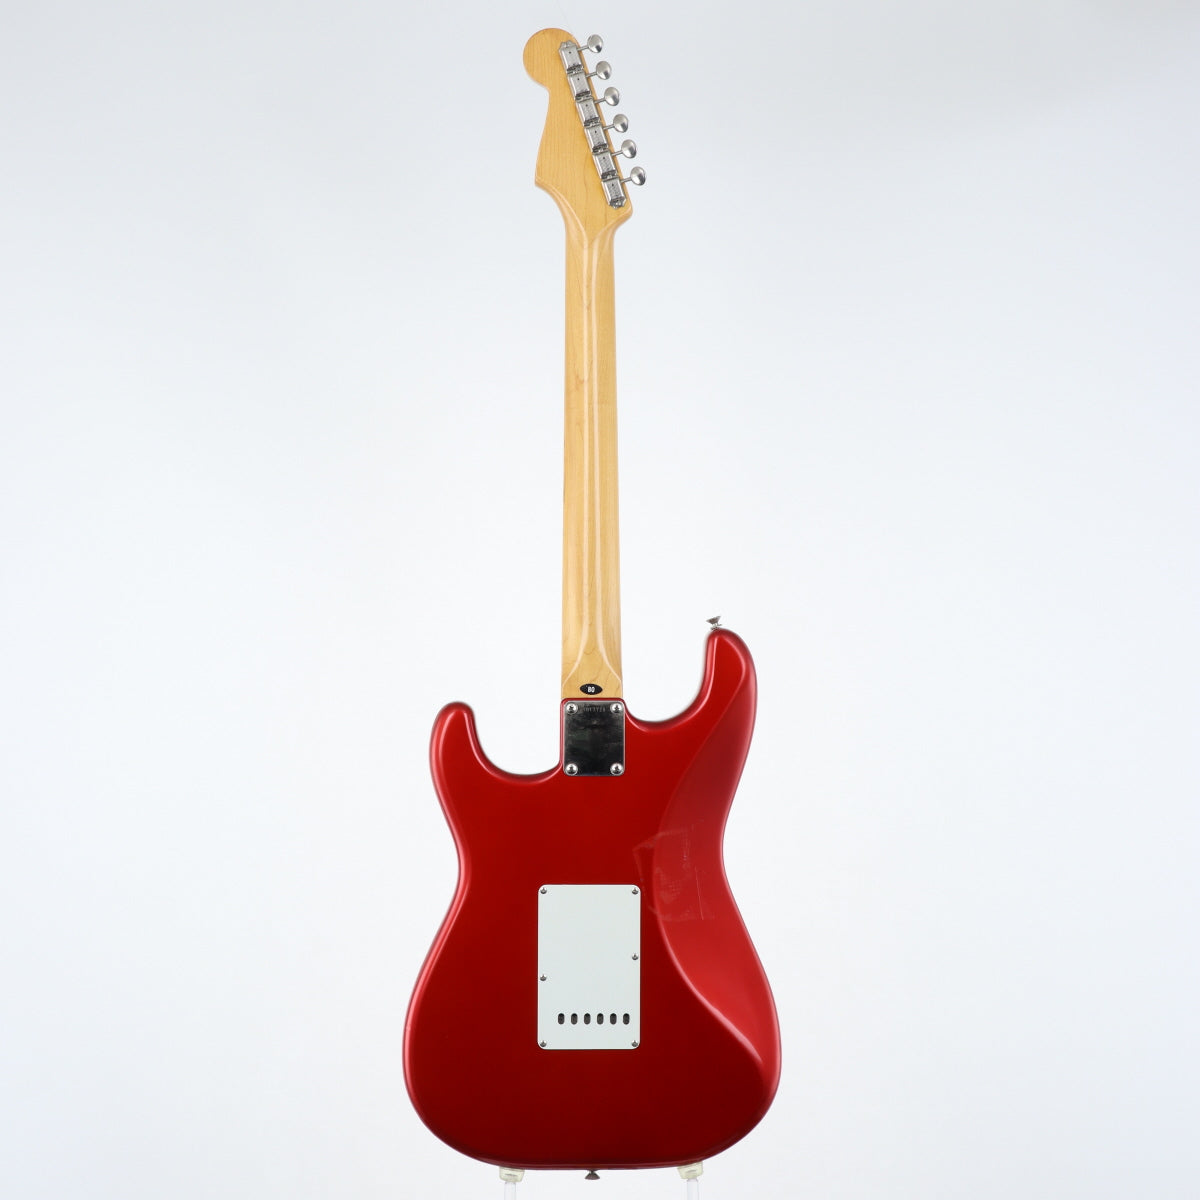 [SN 1013728] USED Tokai / ST-80 Candy Apple Red [11]